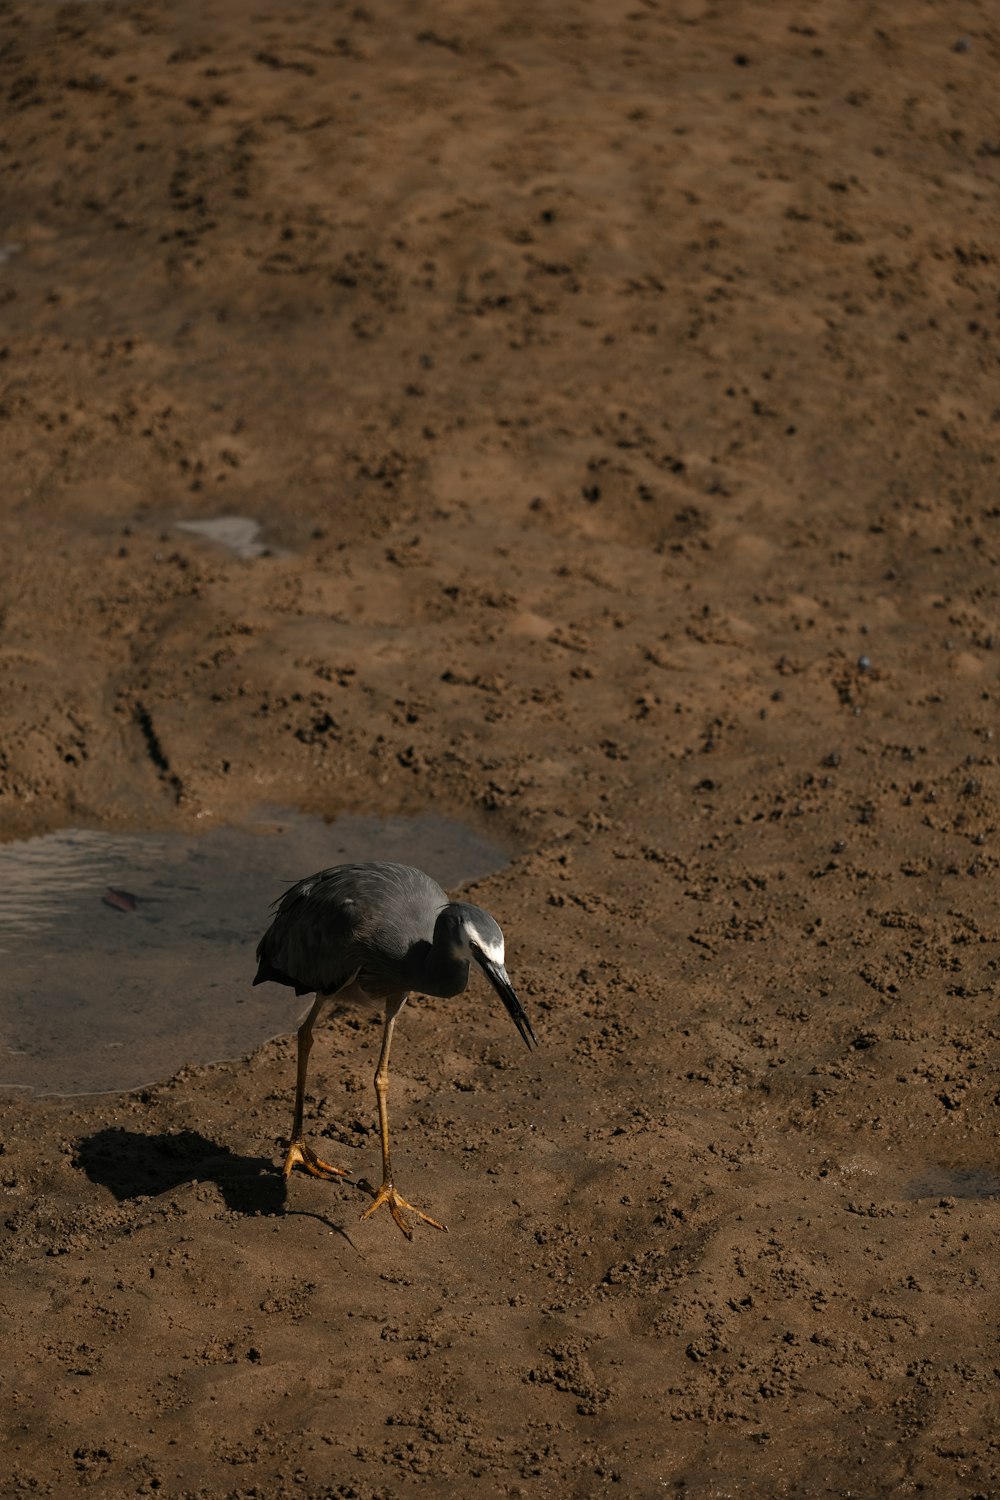 a black and white bird standing in the dirt